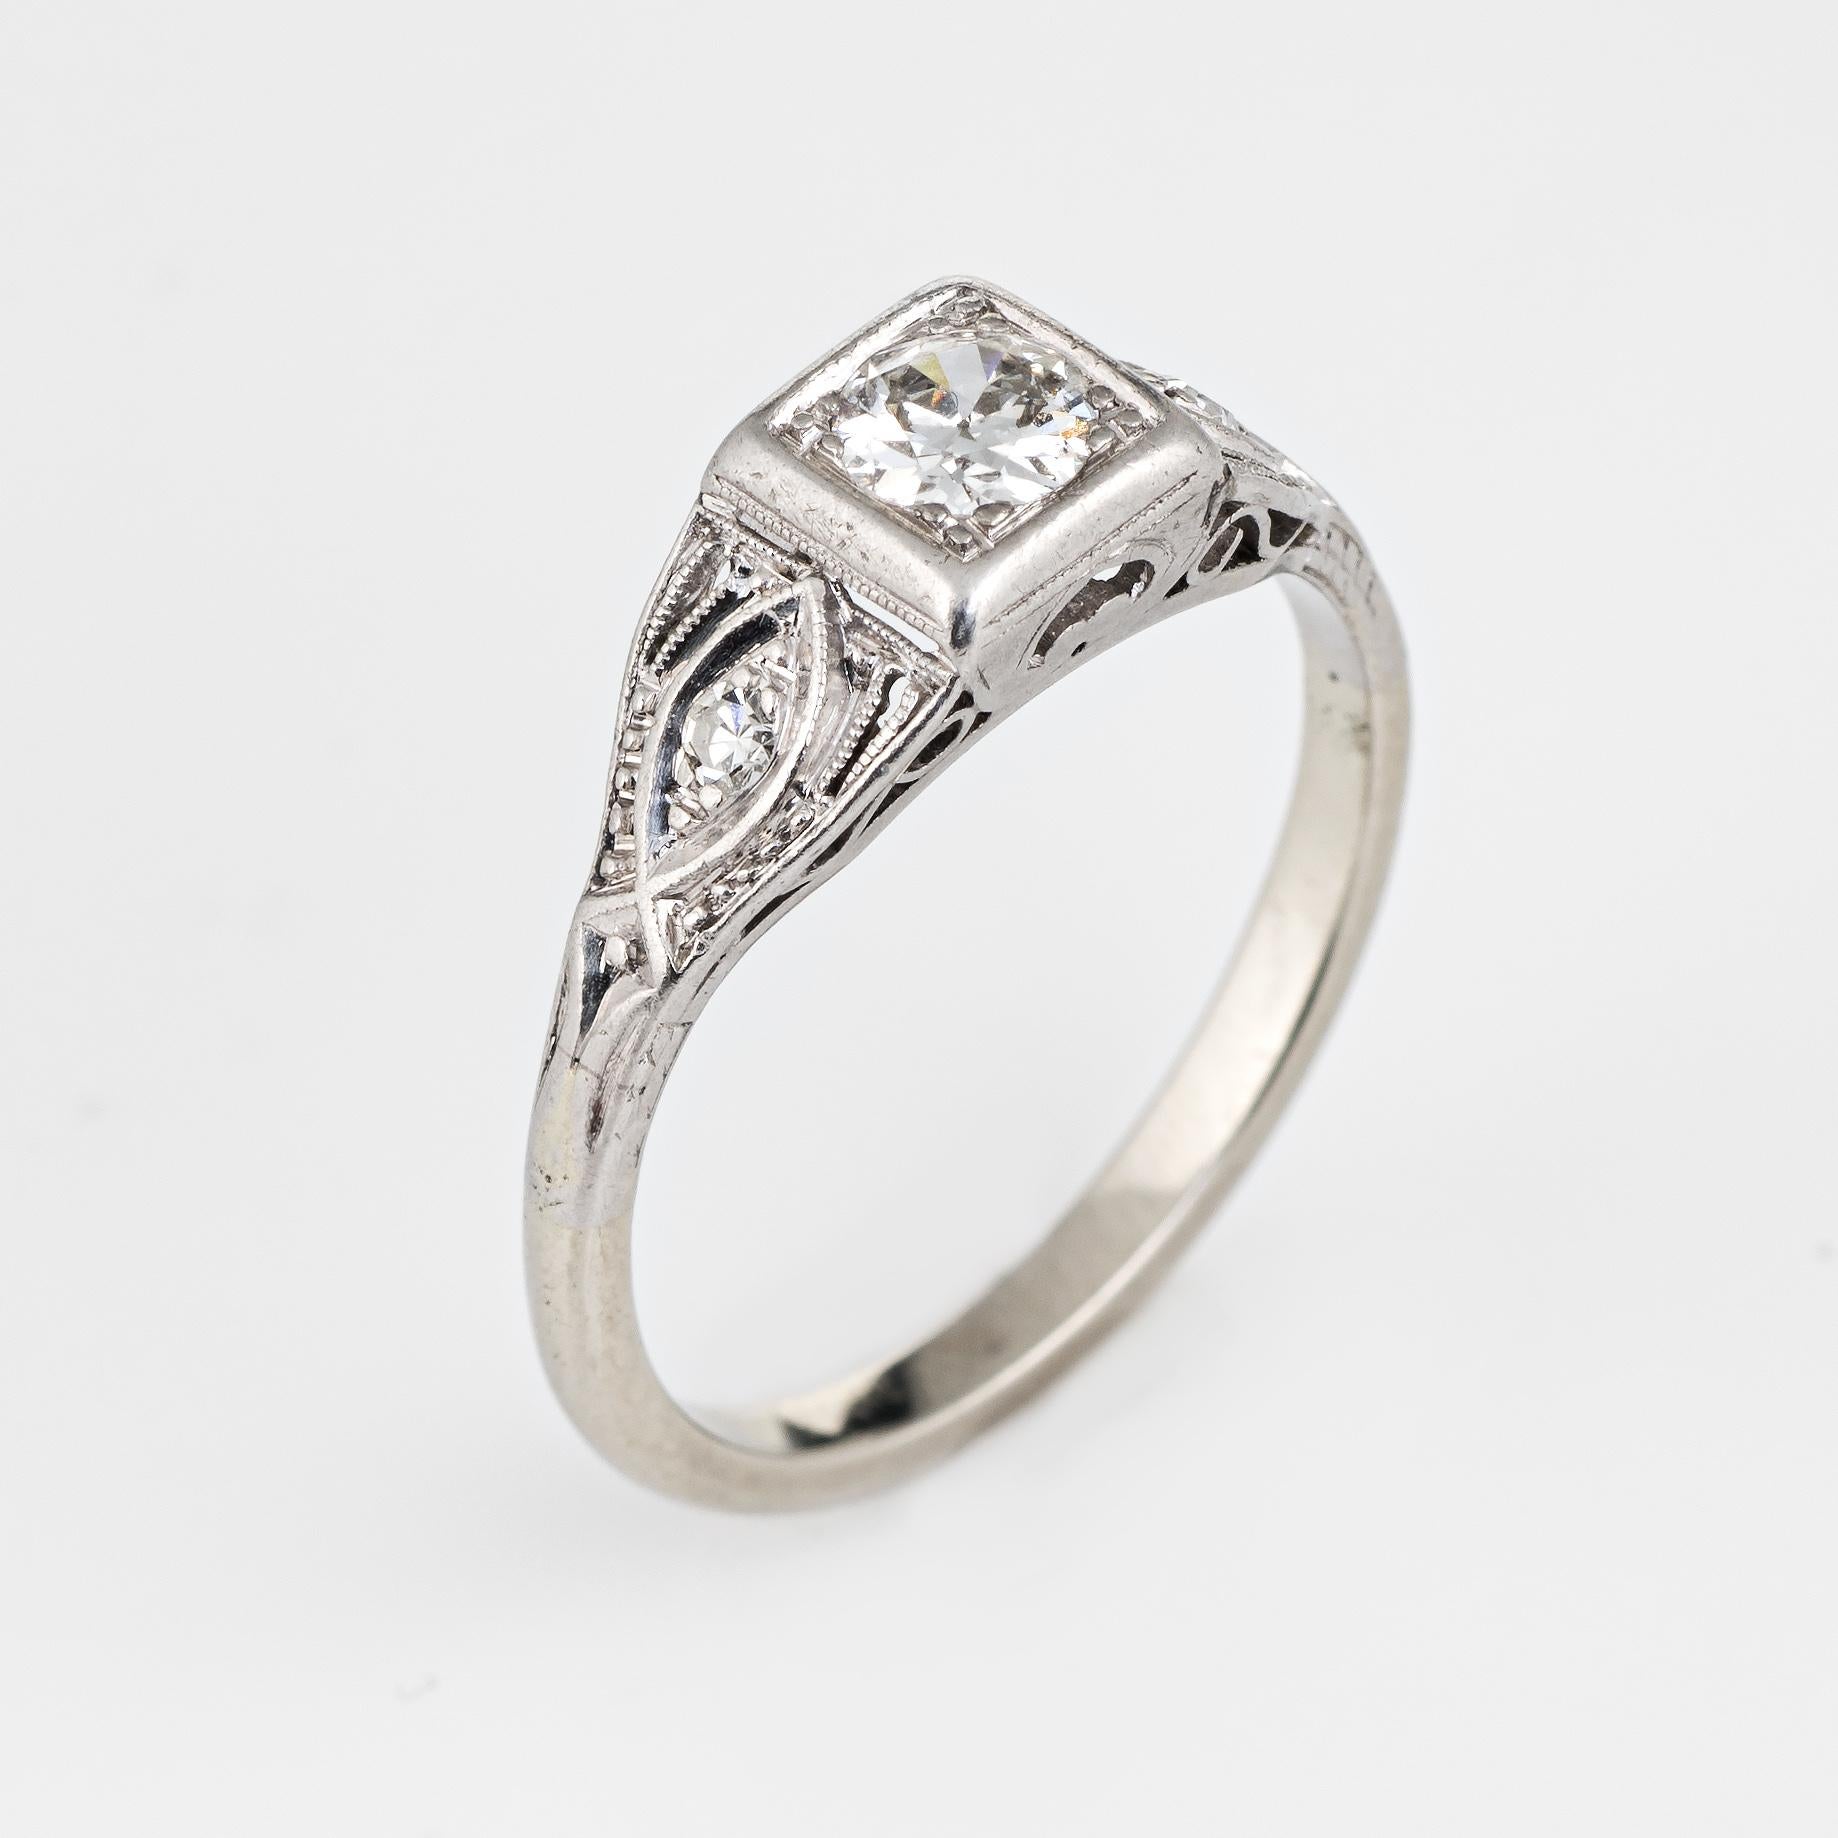 Elegant & finely detailed Art Deco era ring (circa 1920s to 1930s), crafted in 900 platinum & 14k white gold. 

Centrally mounted estimated 0.35 carat old European cut diamond is accented with two estimated 0.01 carat single cut diamonds. The total